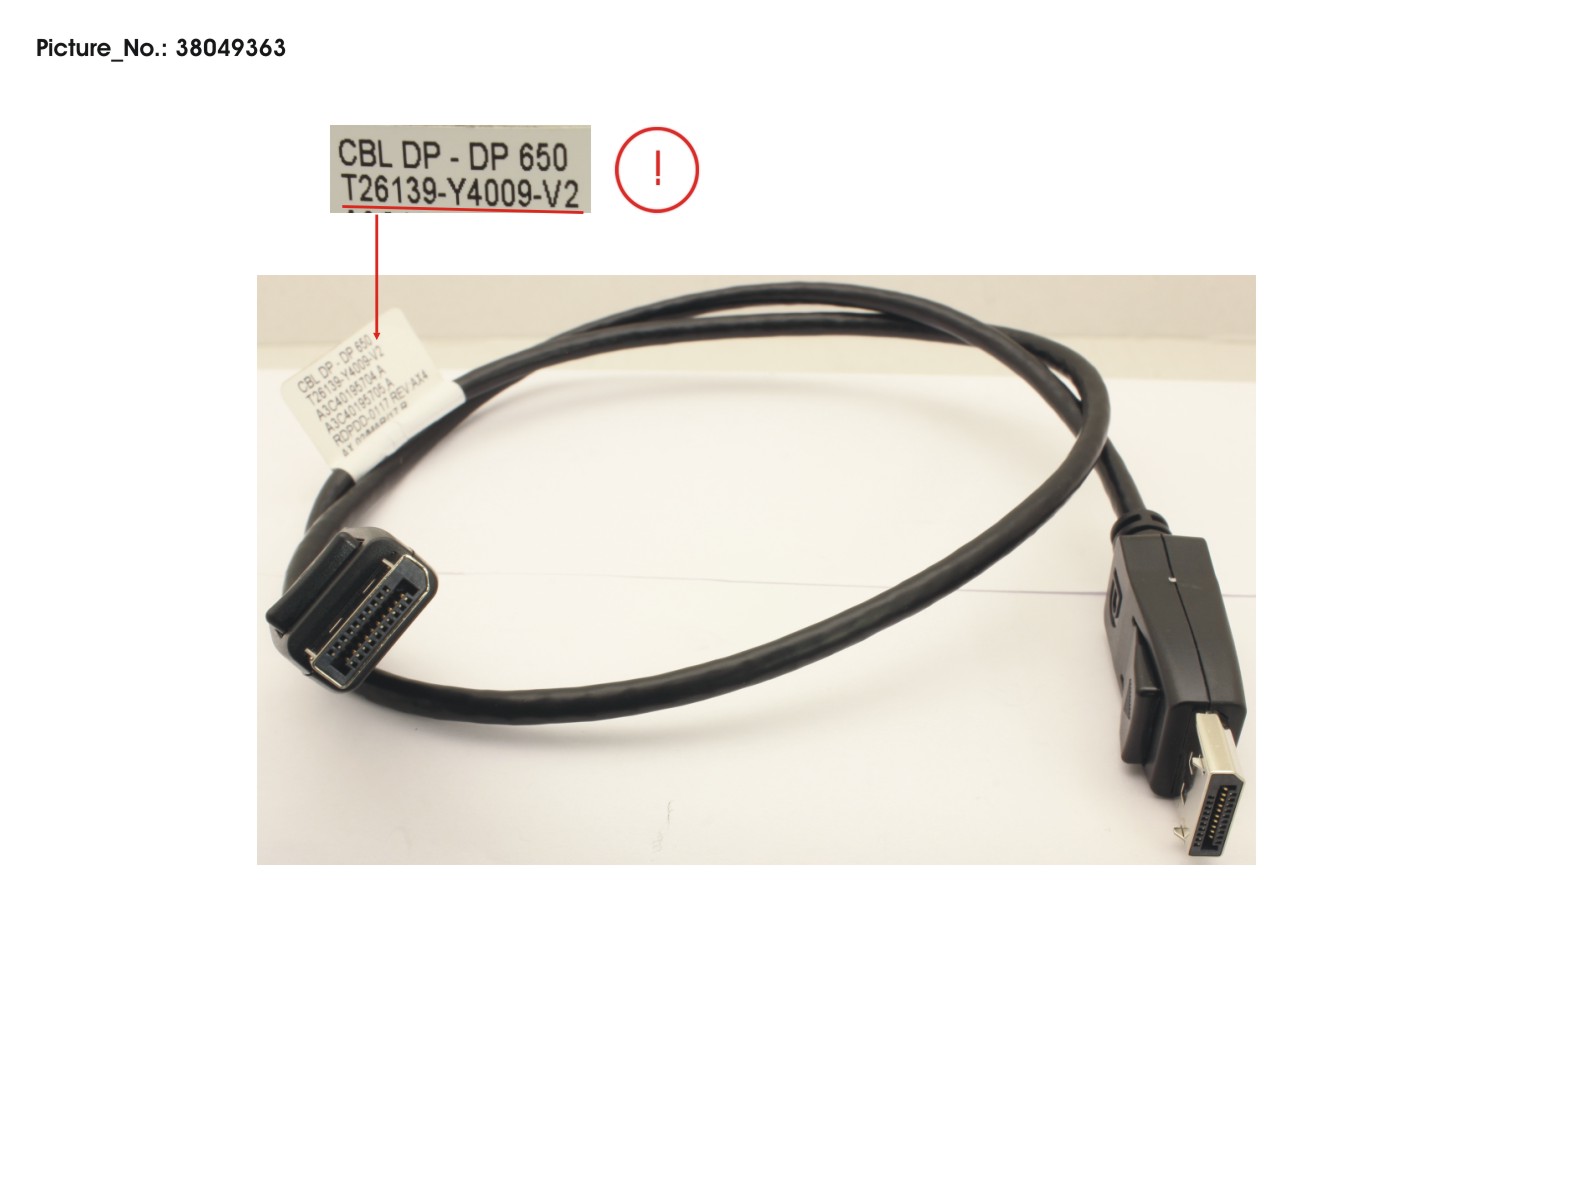 CABLE DP - DP 600